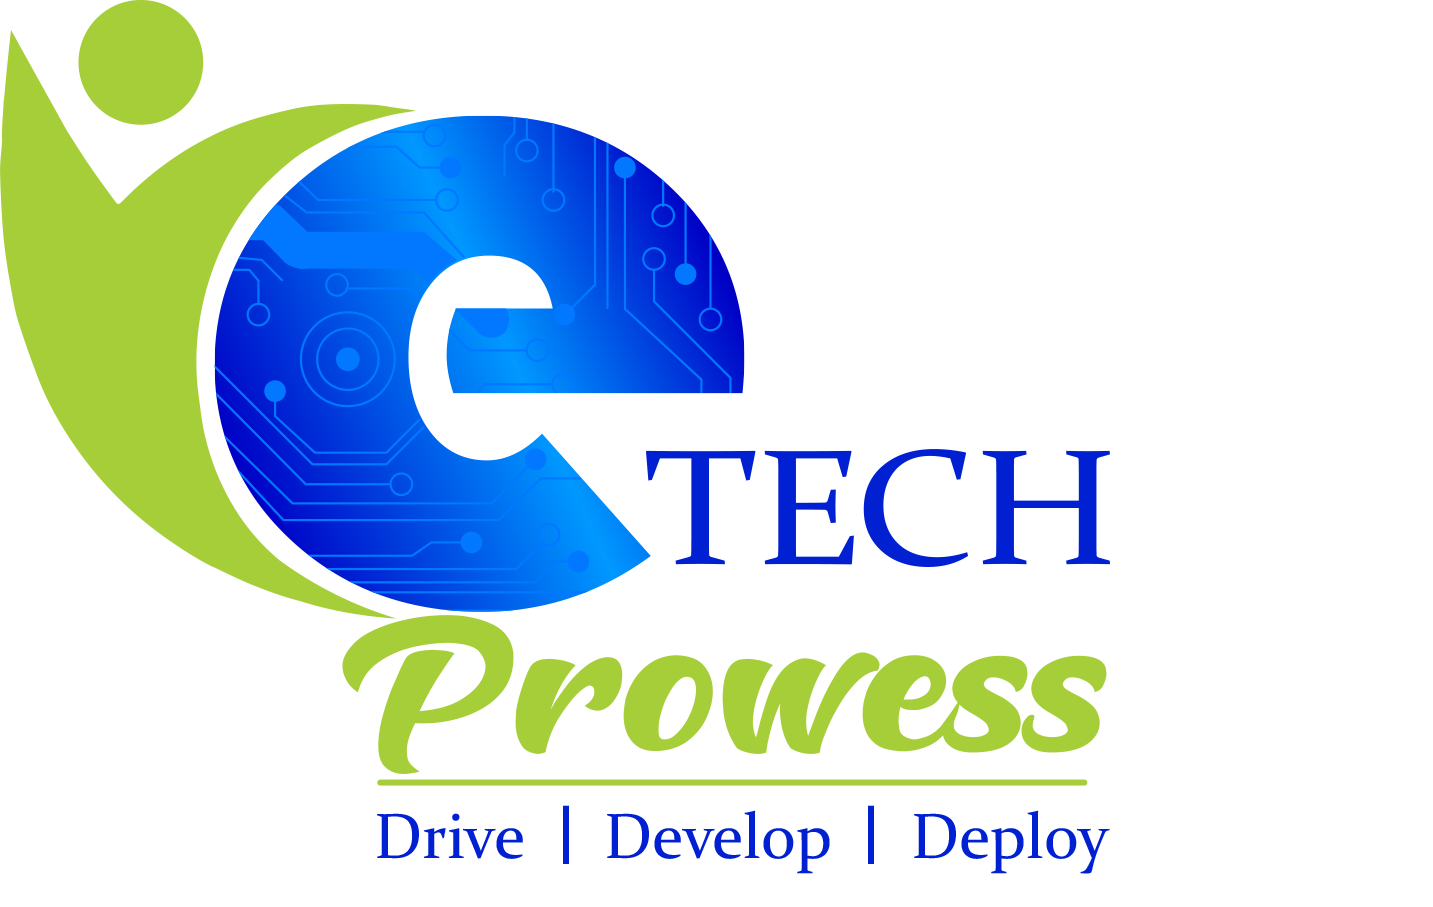 eTech Prowess